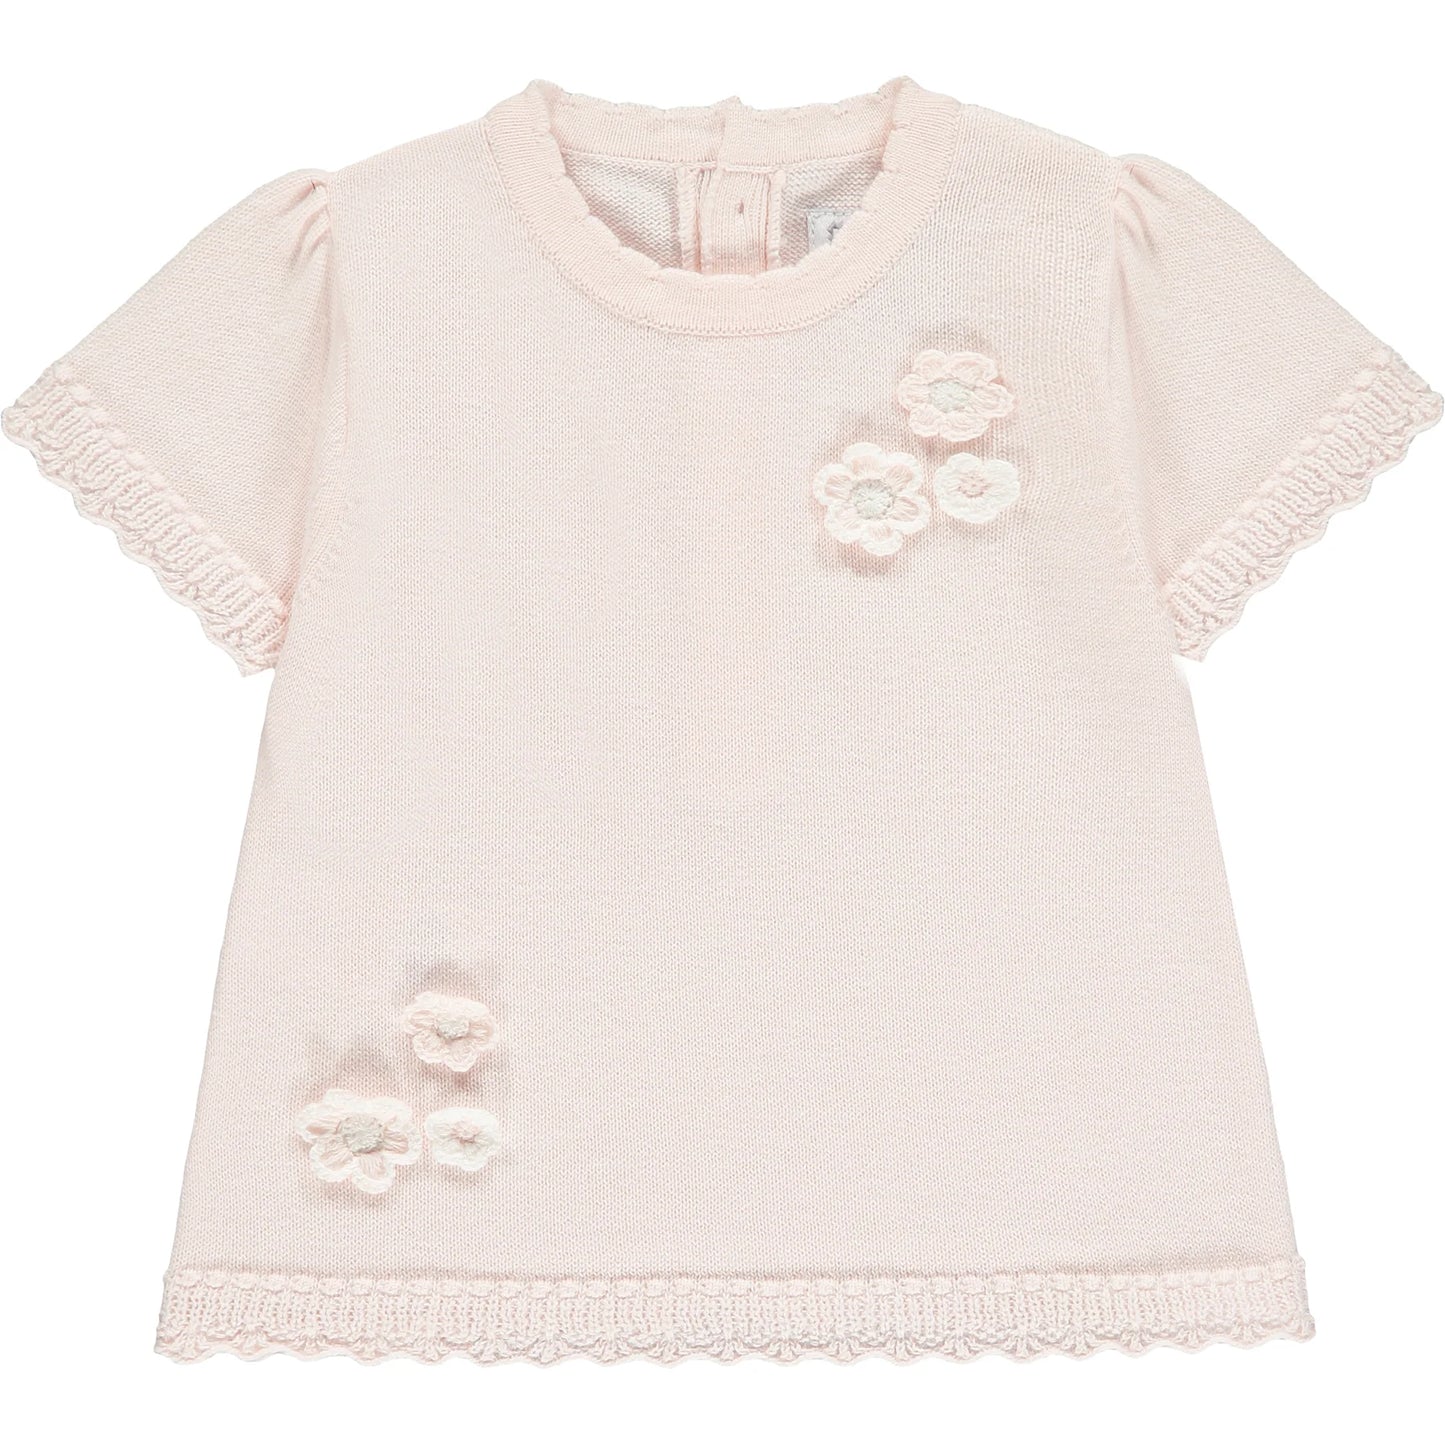 Emile et Rose Baby Girl's Pale Pink Knitted Summer Outfit